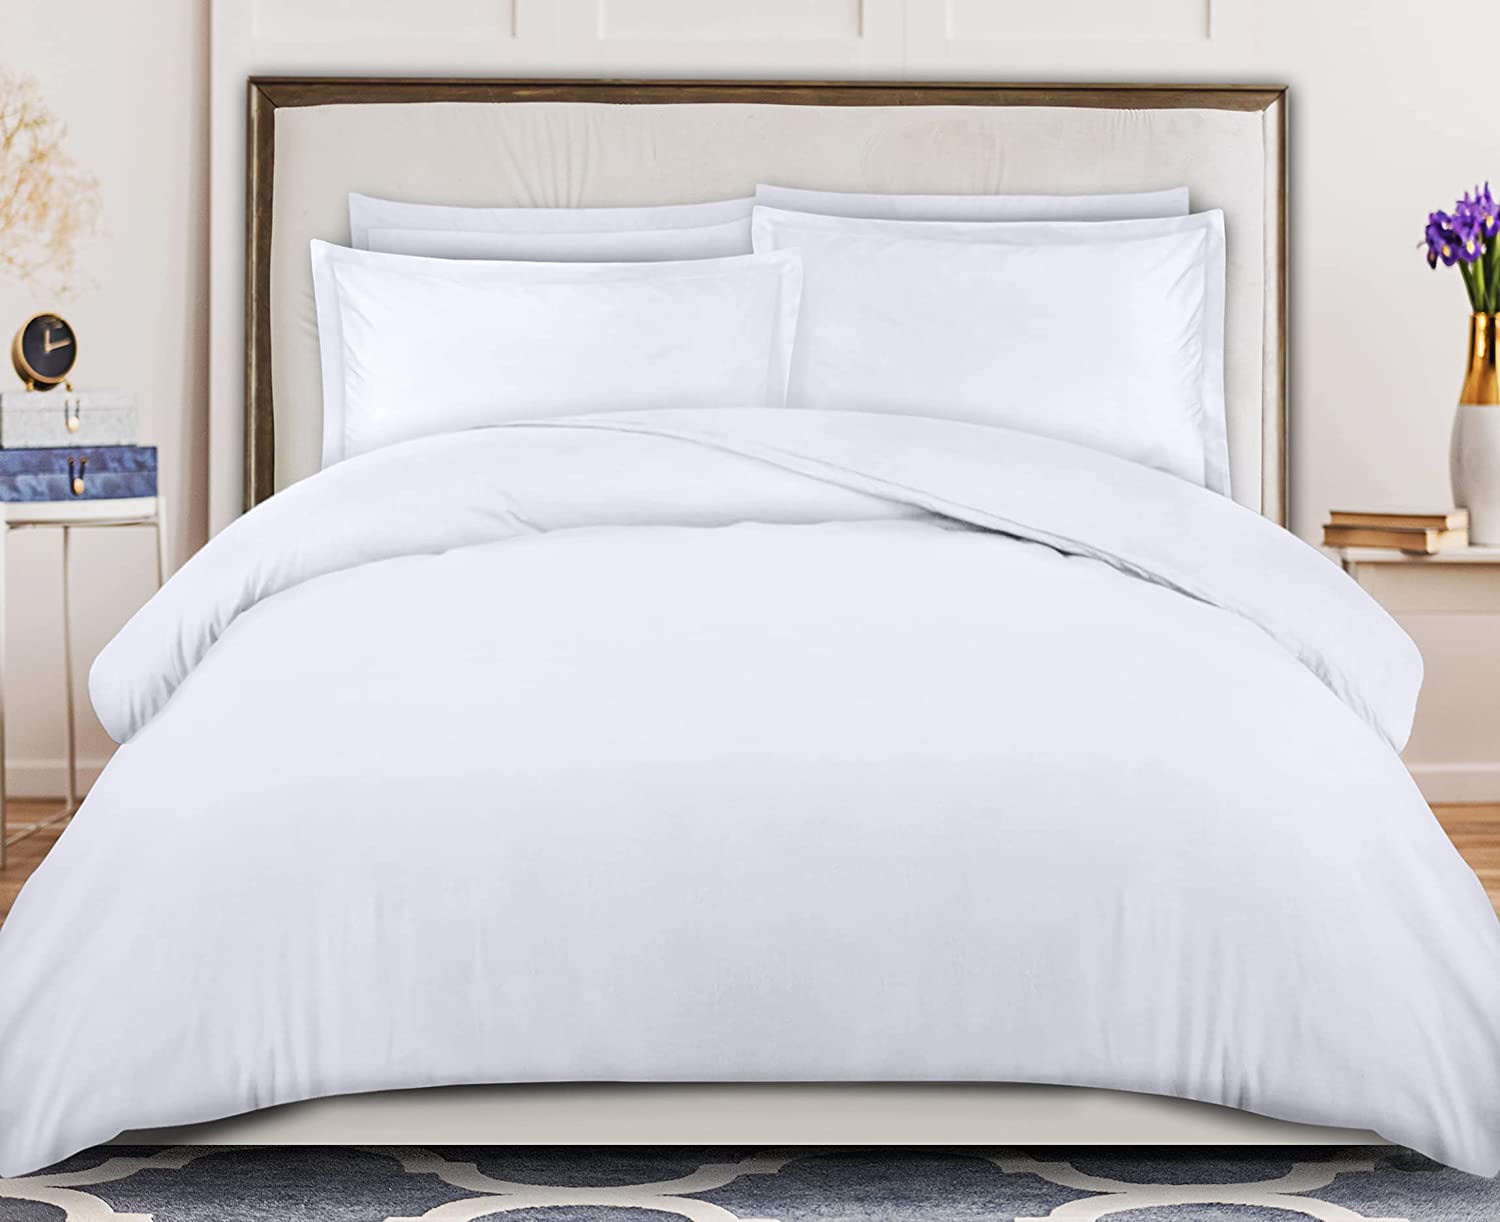 Utopia Bedding Comforter 1 Full Size and 1 Queen Size (White